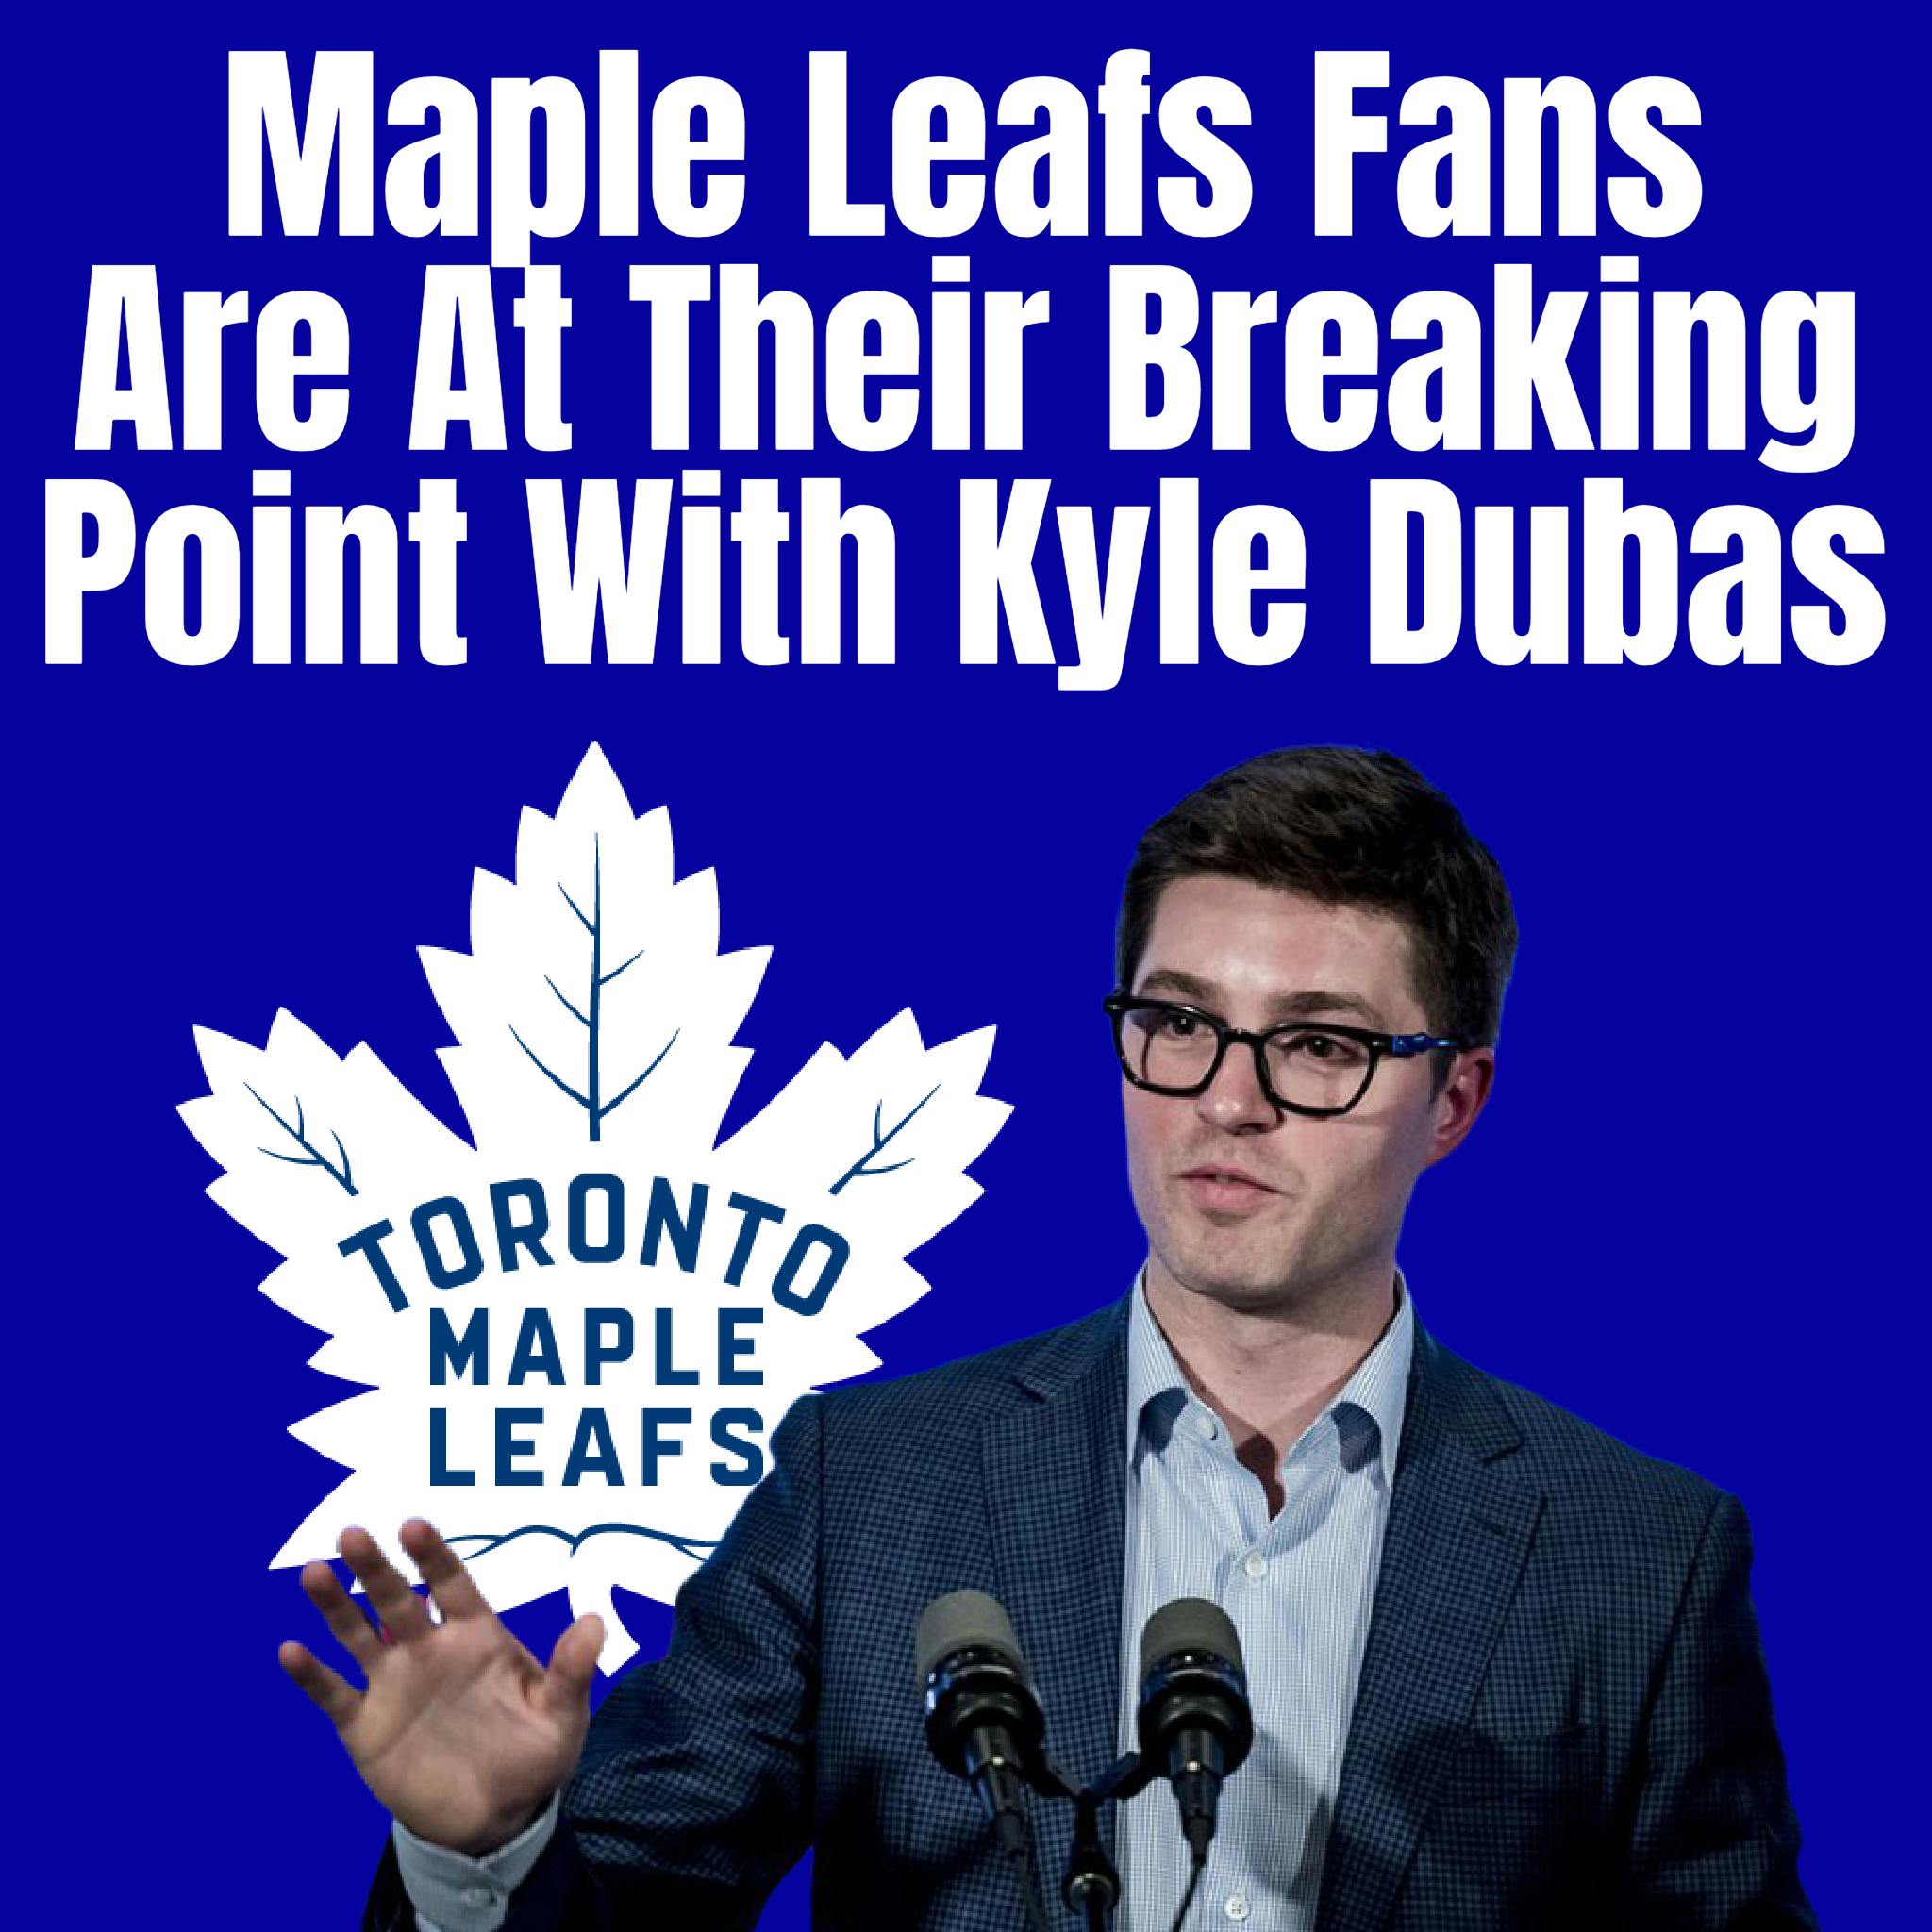 Maple Leafs Fans Are At Their Breaking Point With Kyle Dubas Image